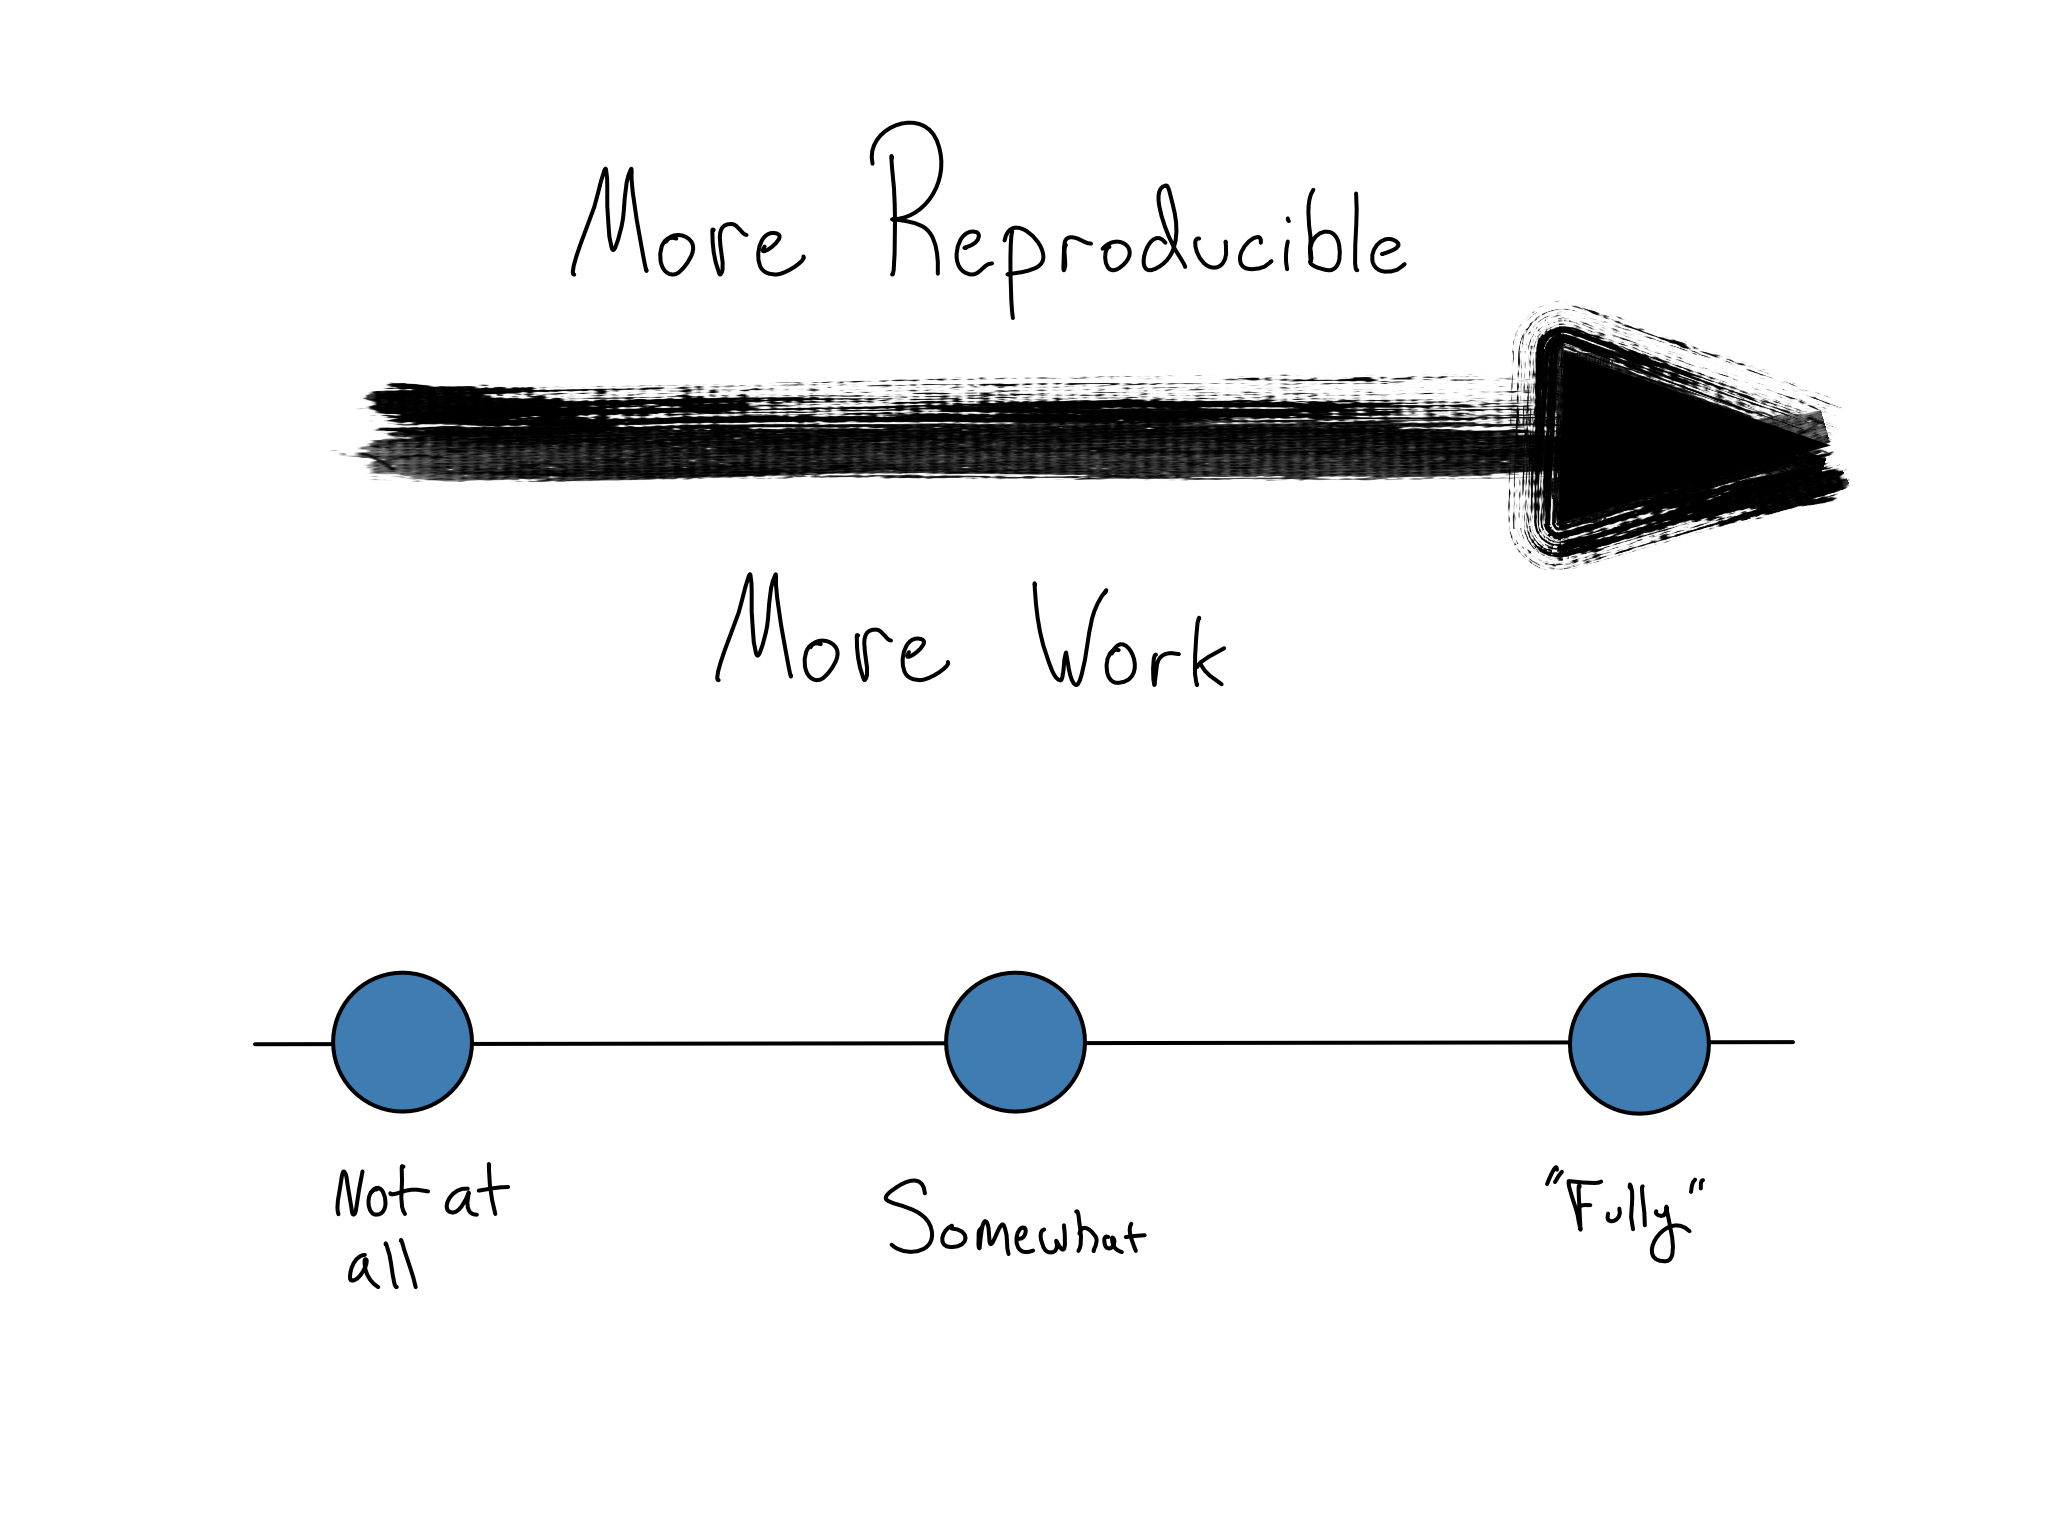 Spectrum of reproducibility from not at all to "fully" indicating that as reproducibility rises, so does that amount of work.